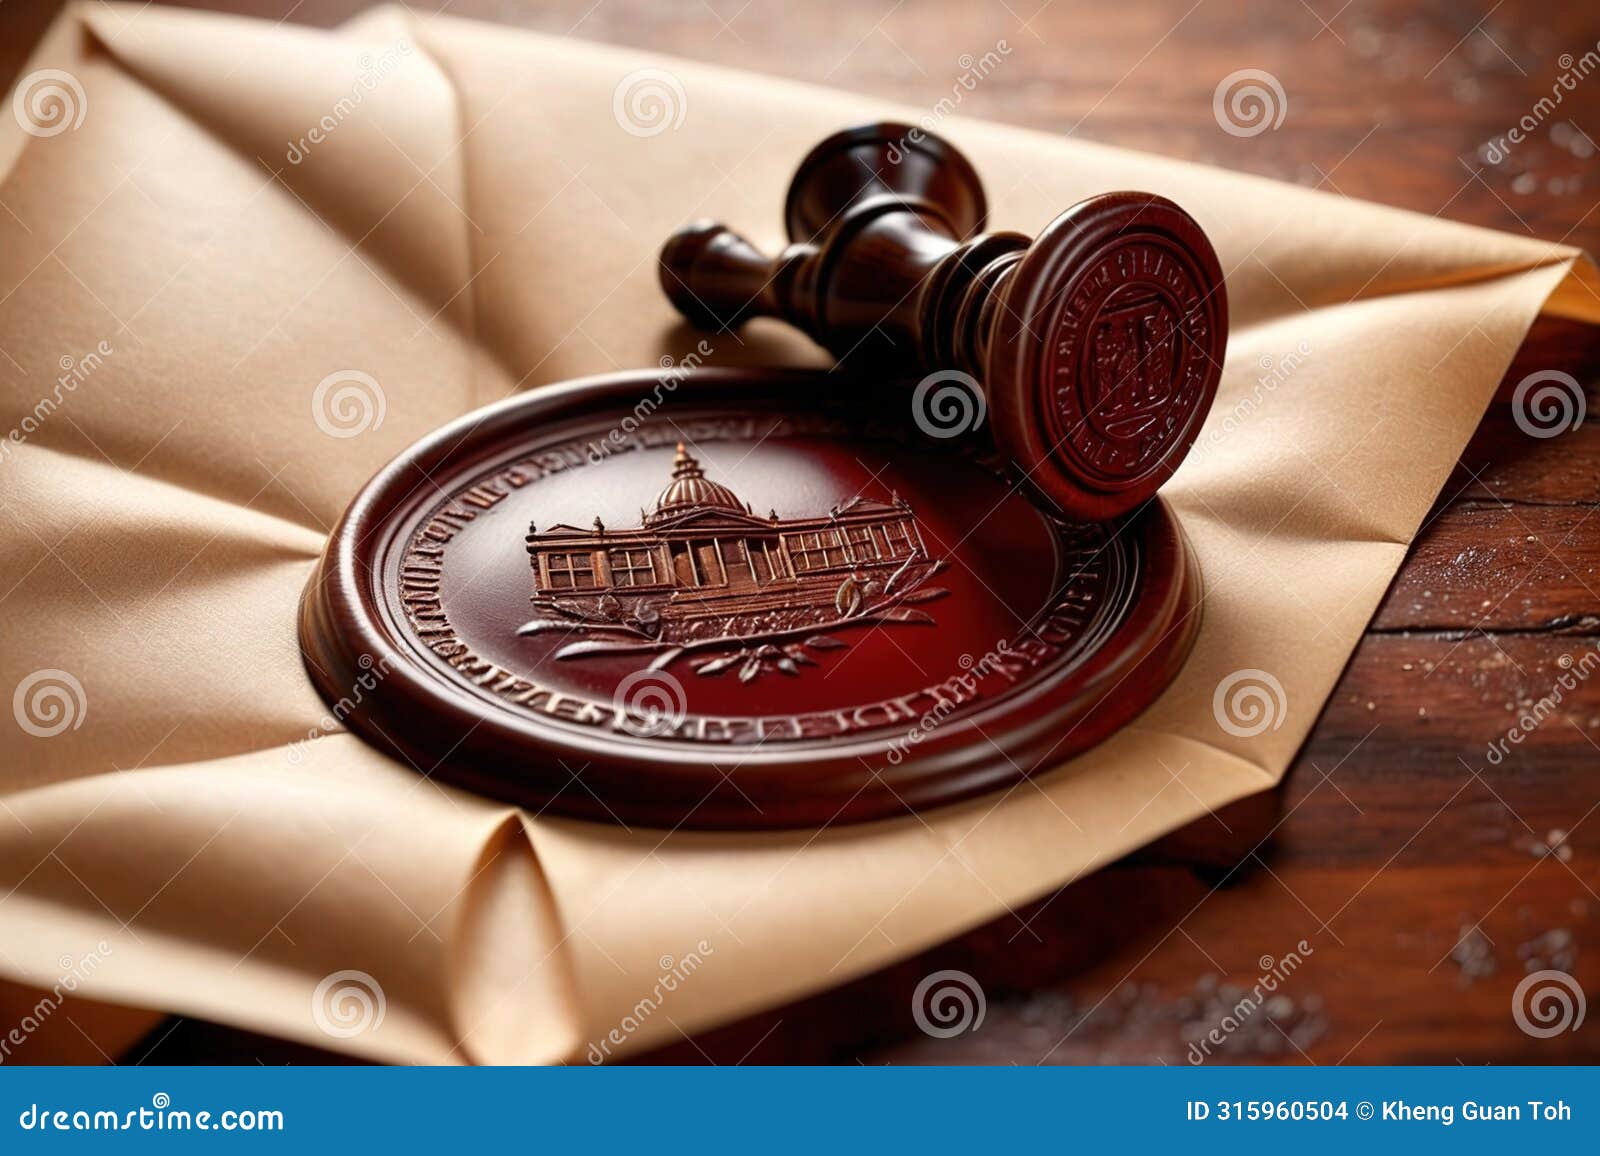 offical wax seal used to certify identity and authority, on document envelope